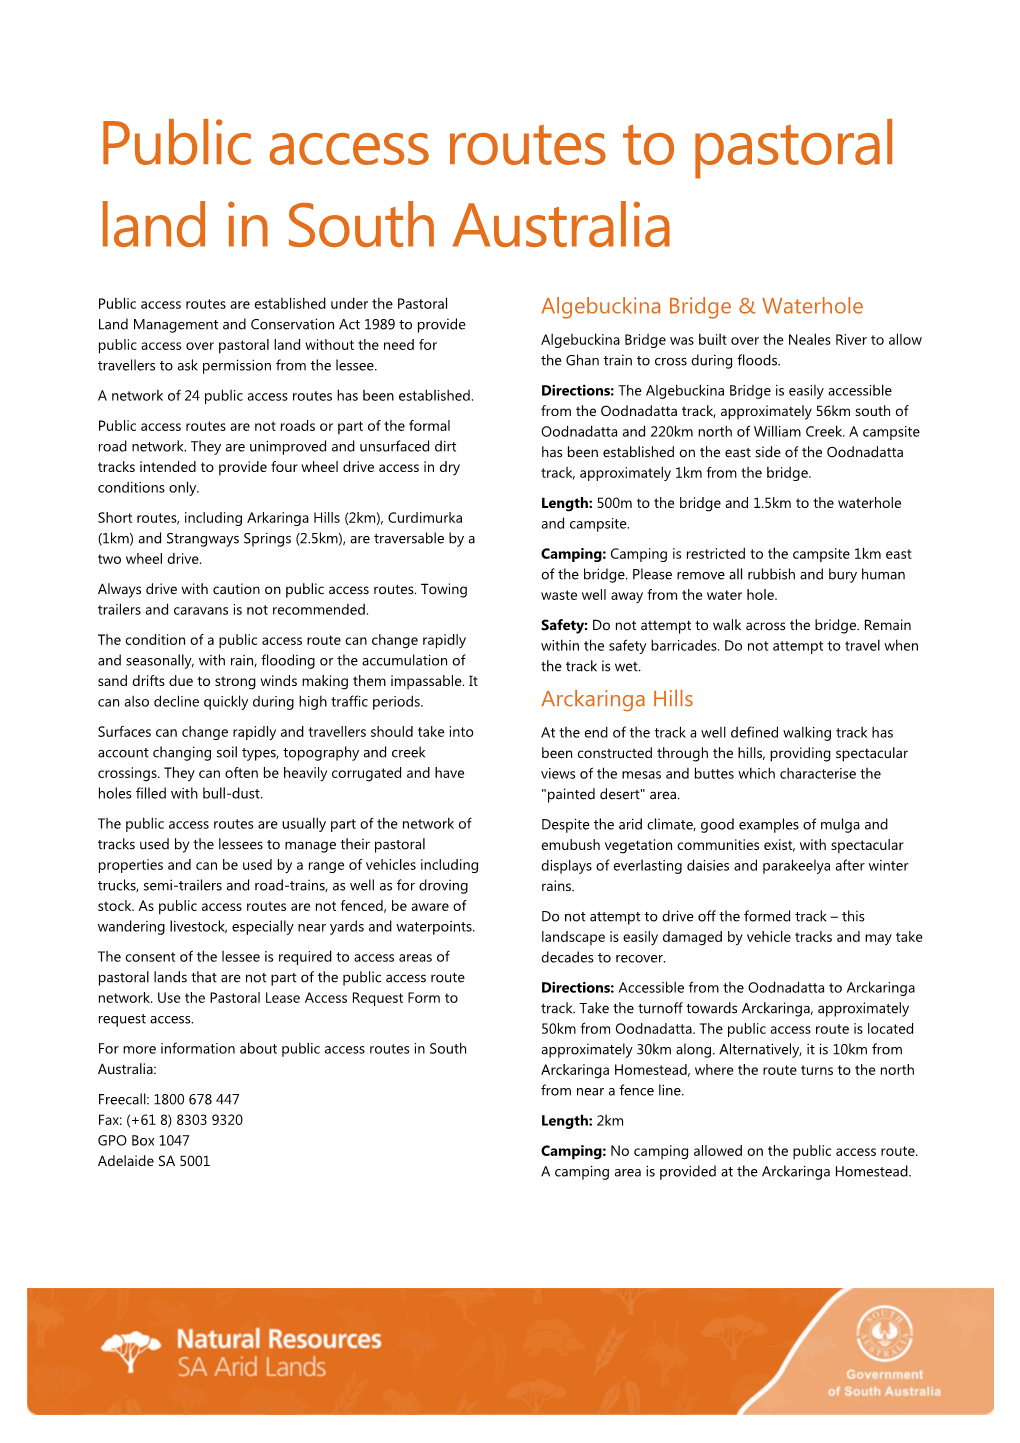 Public Access Routes to Pastoral Land in South Australia